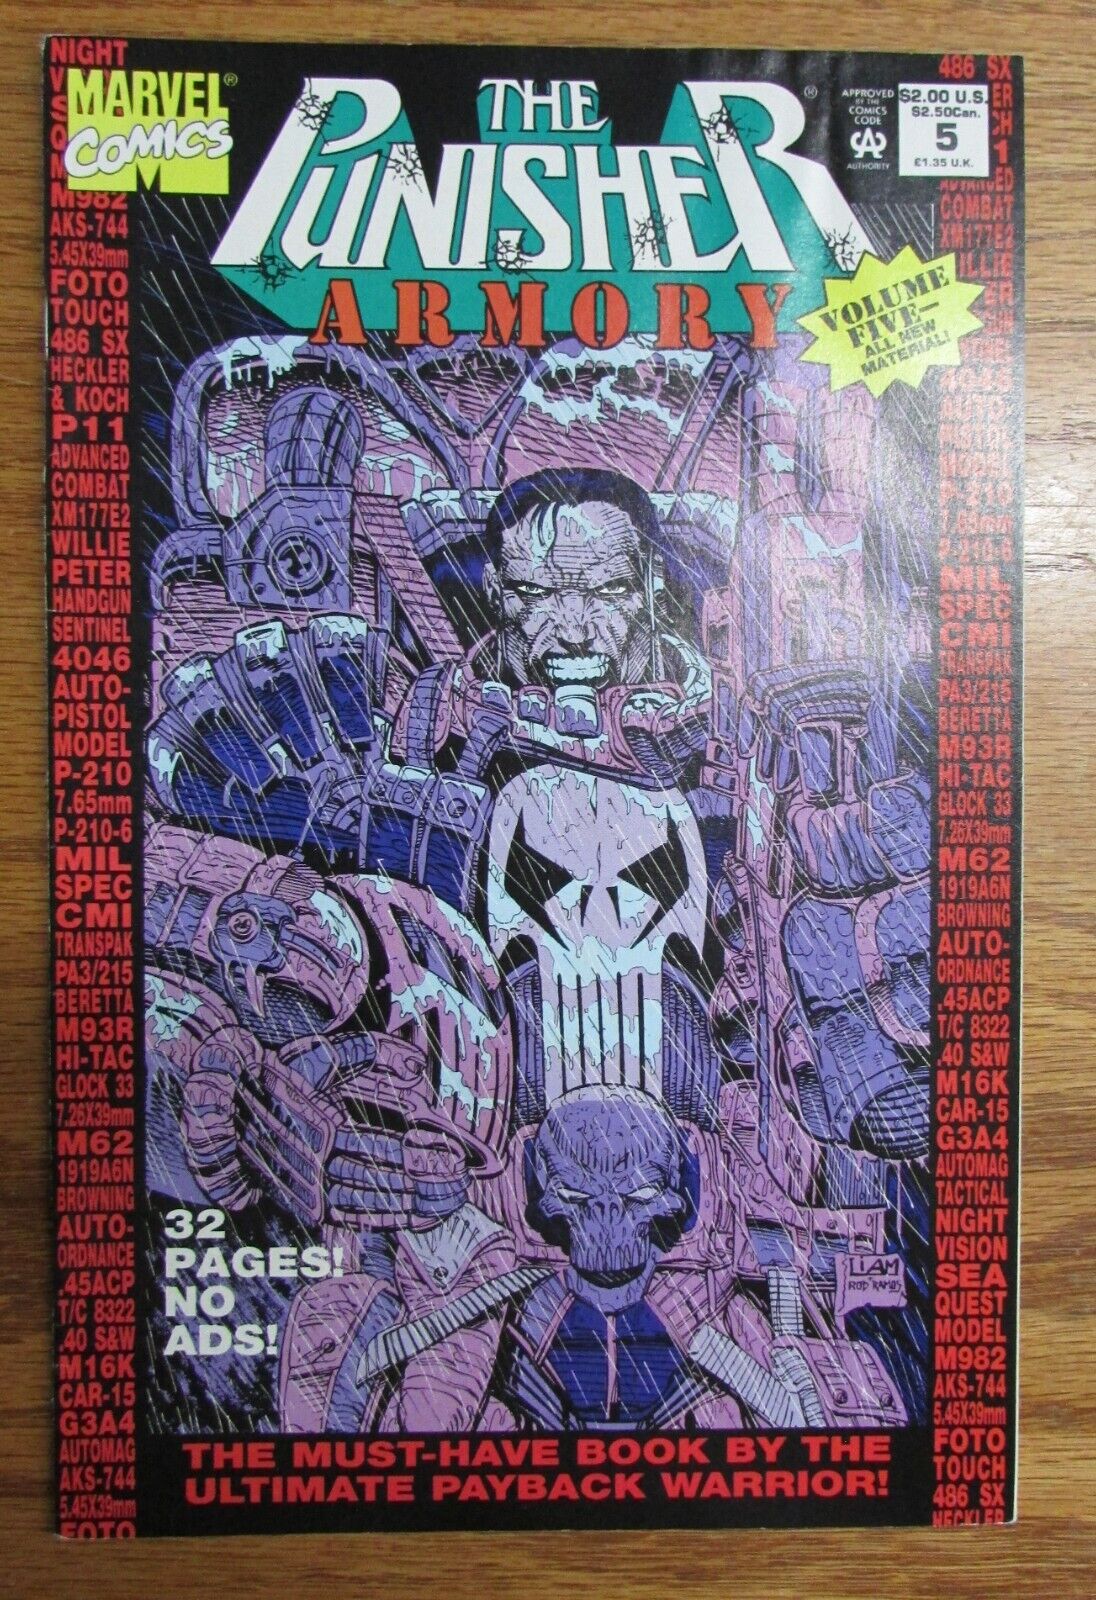 MARVEL COMIC BOOK THE PUNISHER ARMORY #5 FEB 1993 VOLUME 5